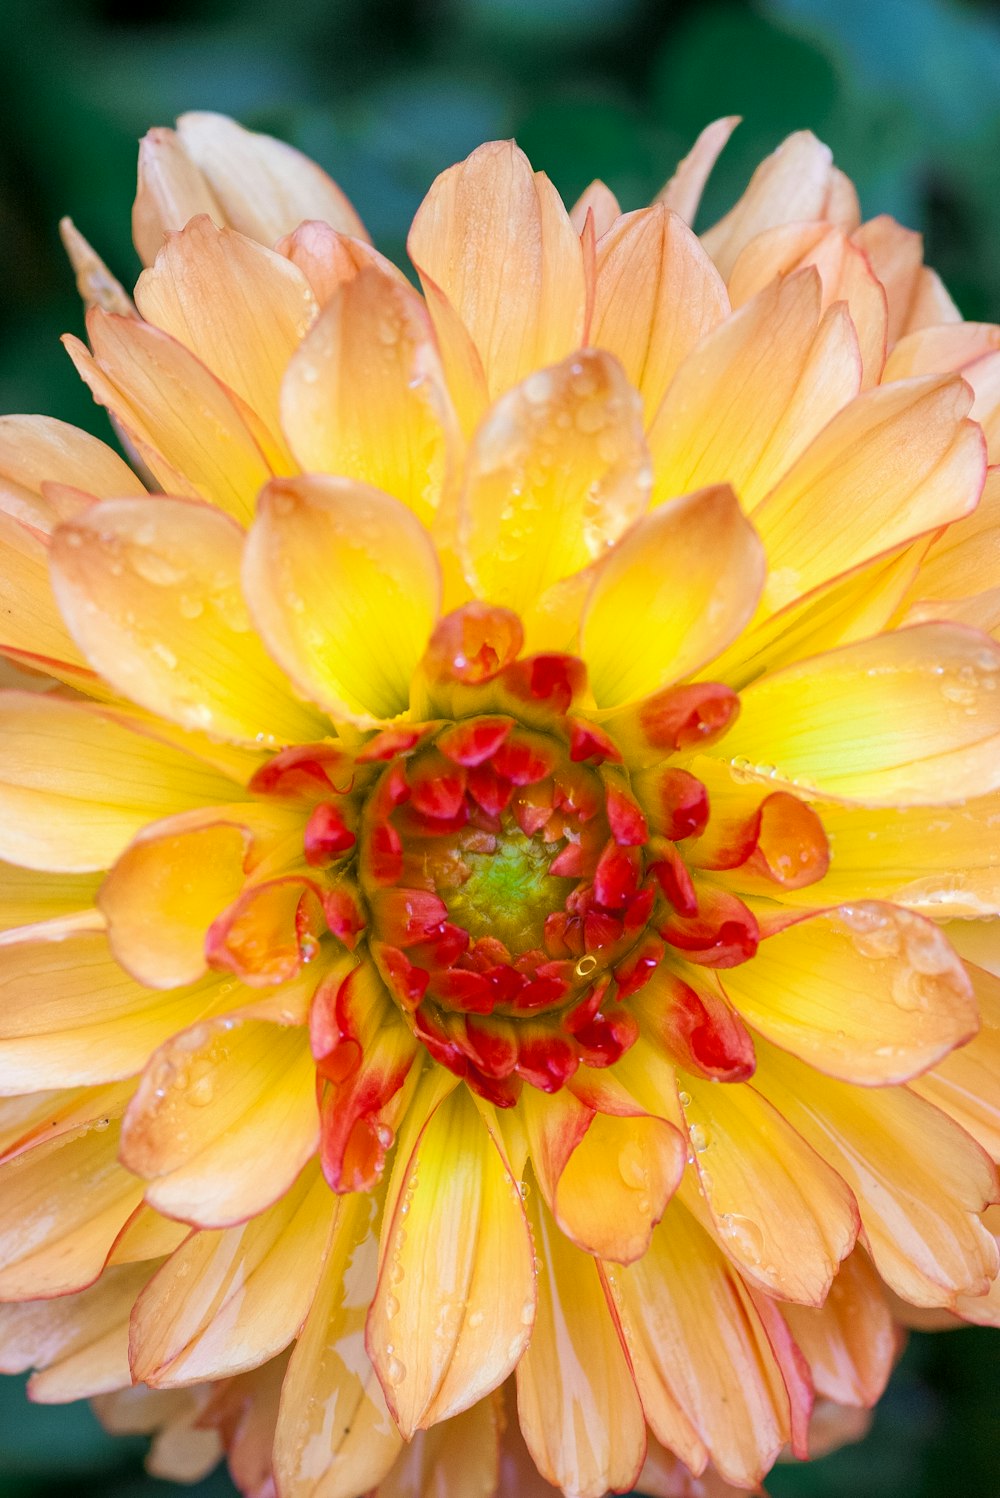 a yellow and red flower with drops of water on it